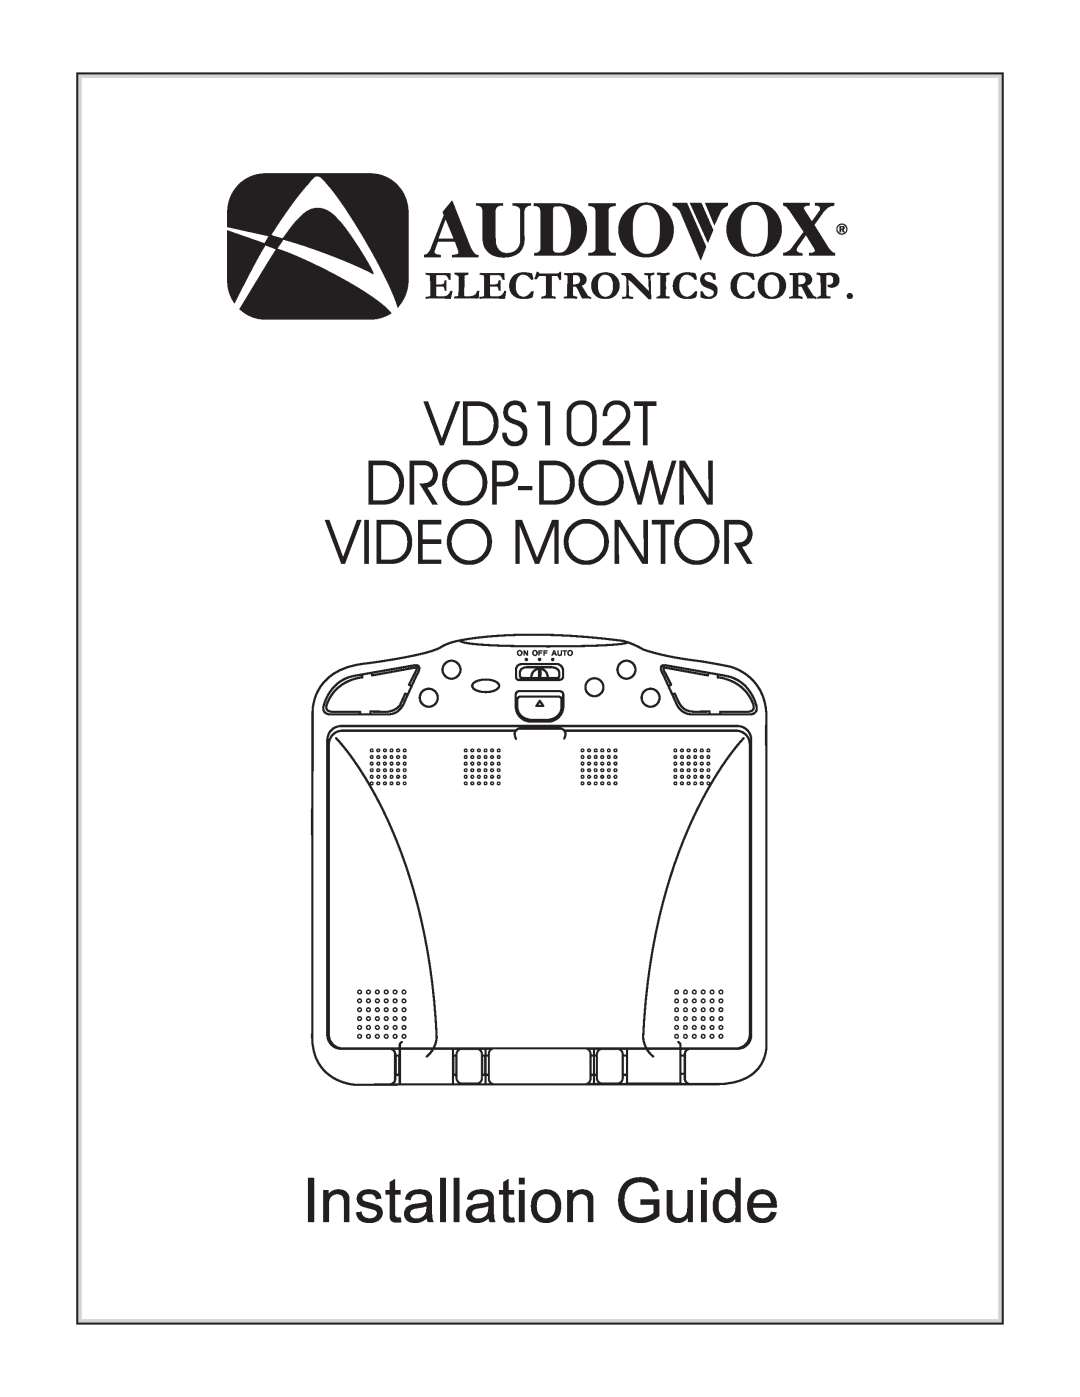 Audiovox manual VDS102T DROP-DOWN VIDEO MONTOR, Installation Guide, On Off Auto 